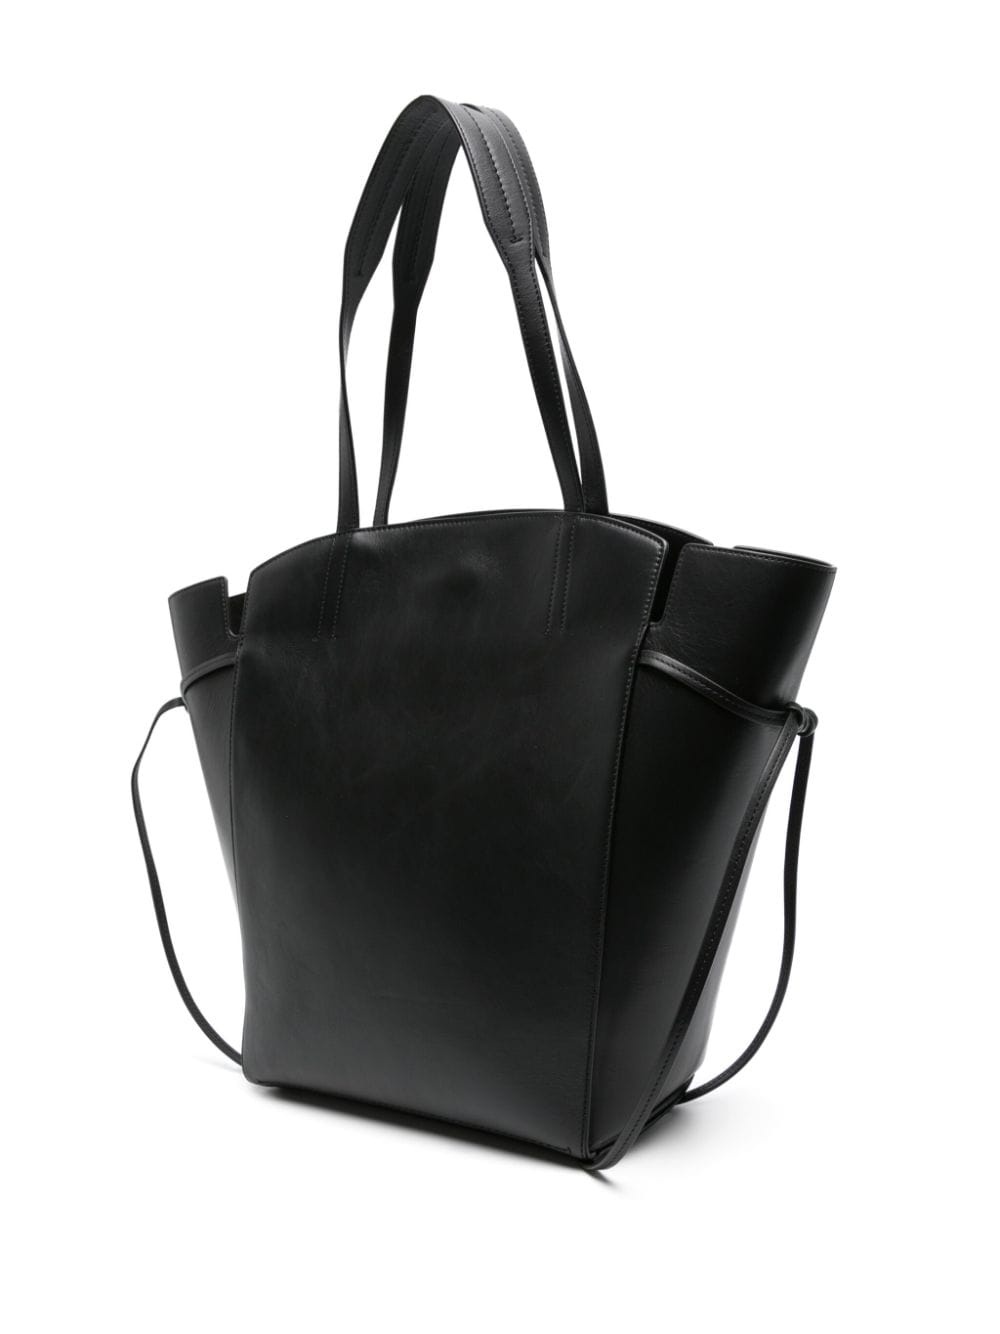 Clovelly leather tote bag - 3